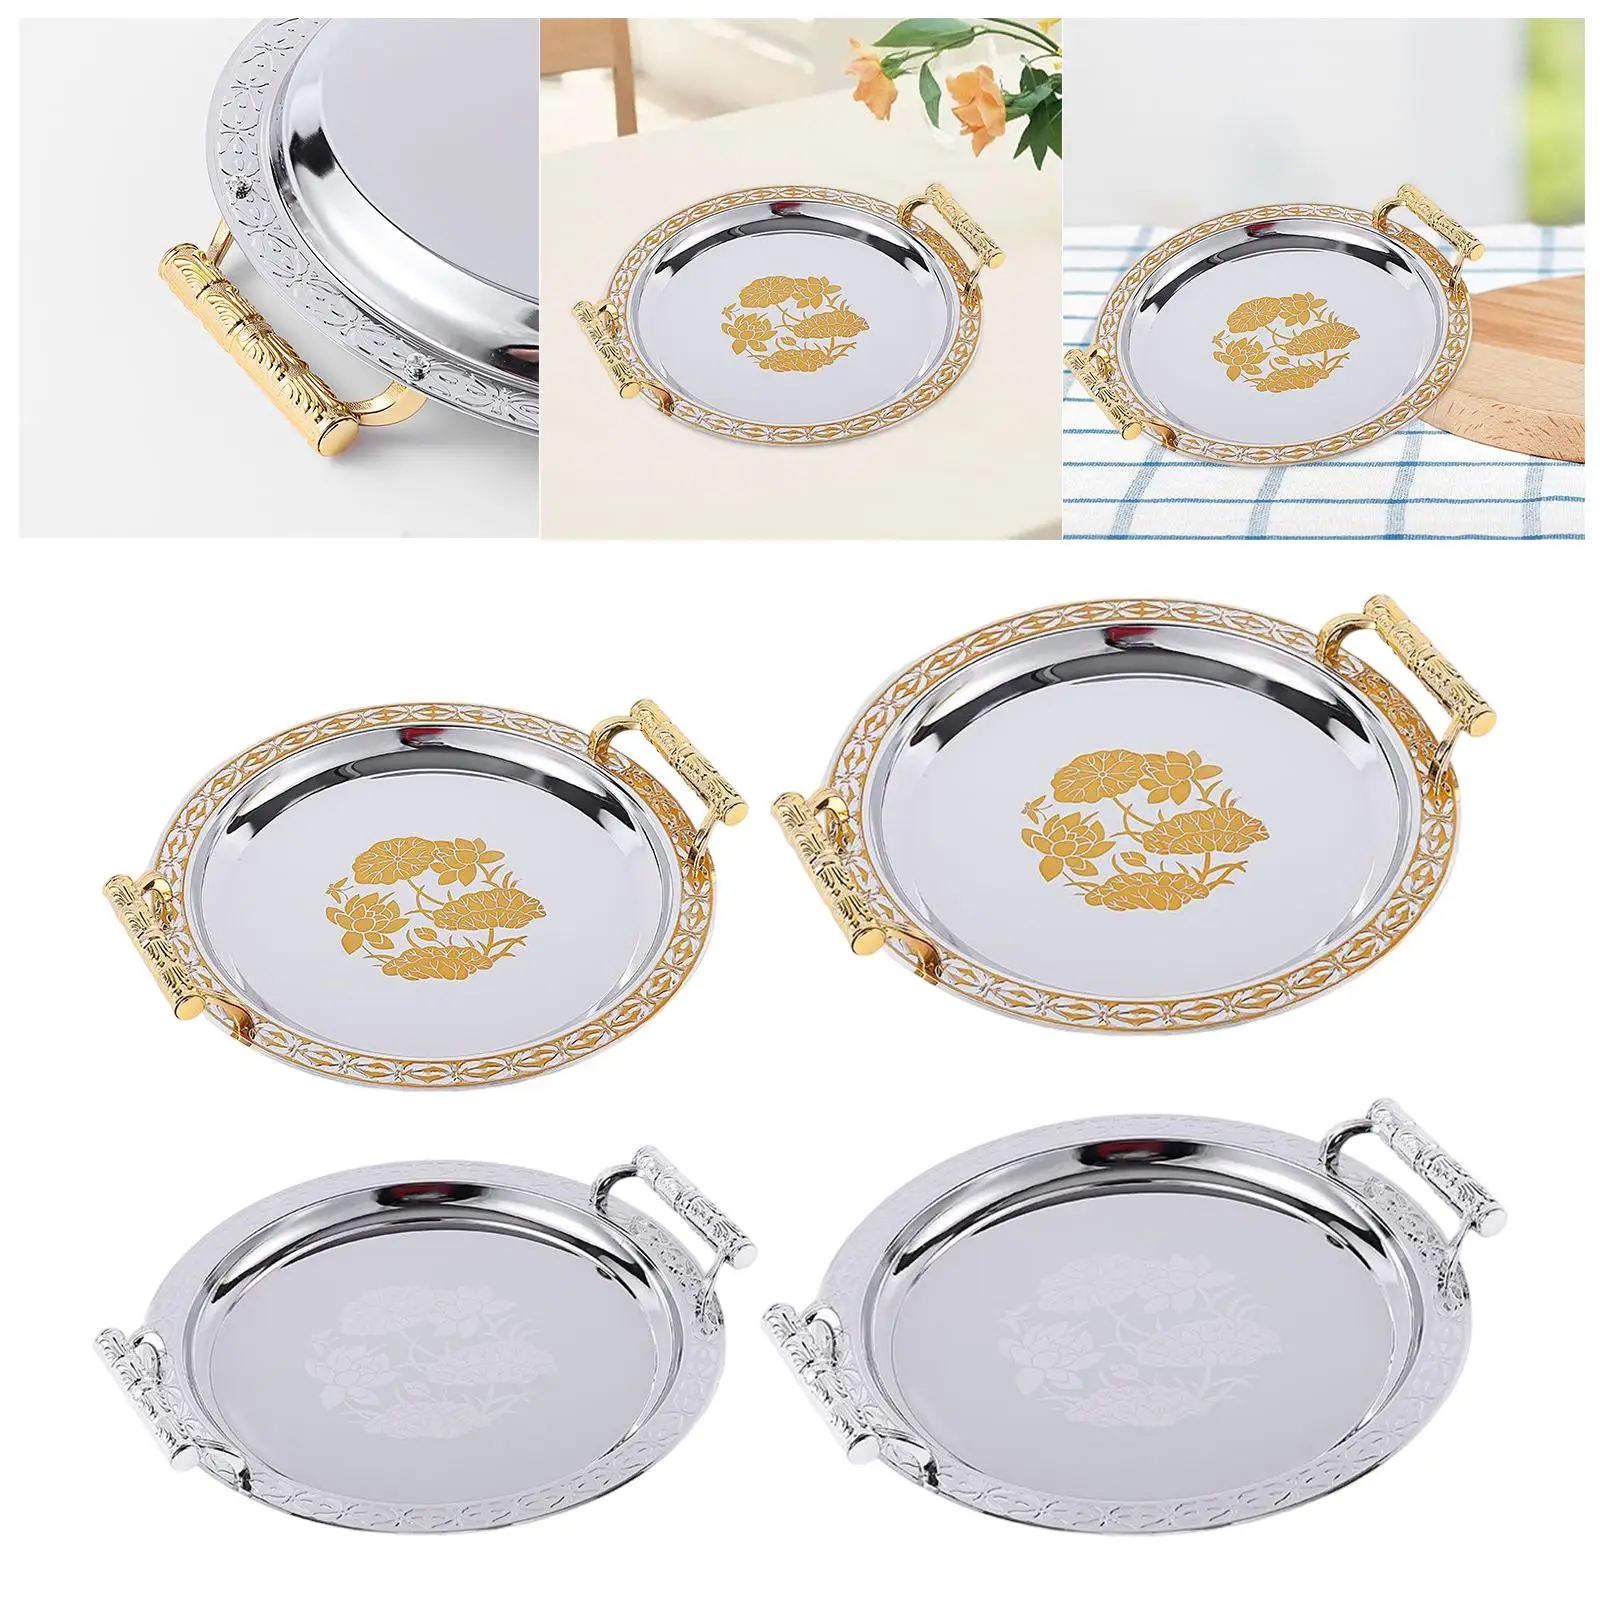 Modern Elegant Round Serving Tray with Handles Fruit Dessert Tray for Parties Coffee Table Bathroom Eating Storing Home